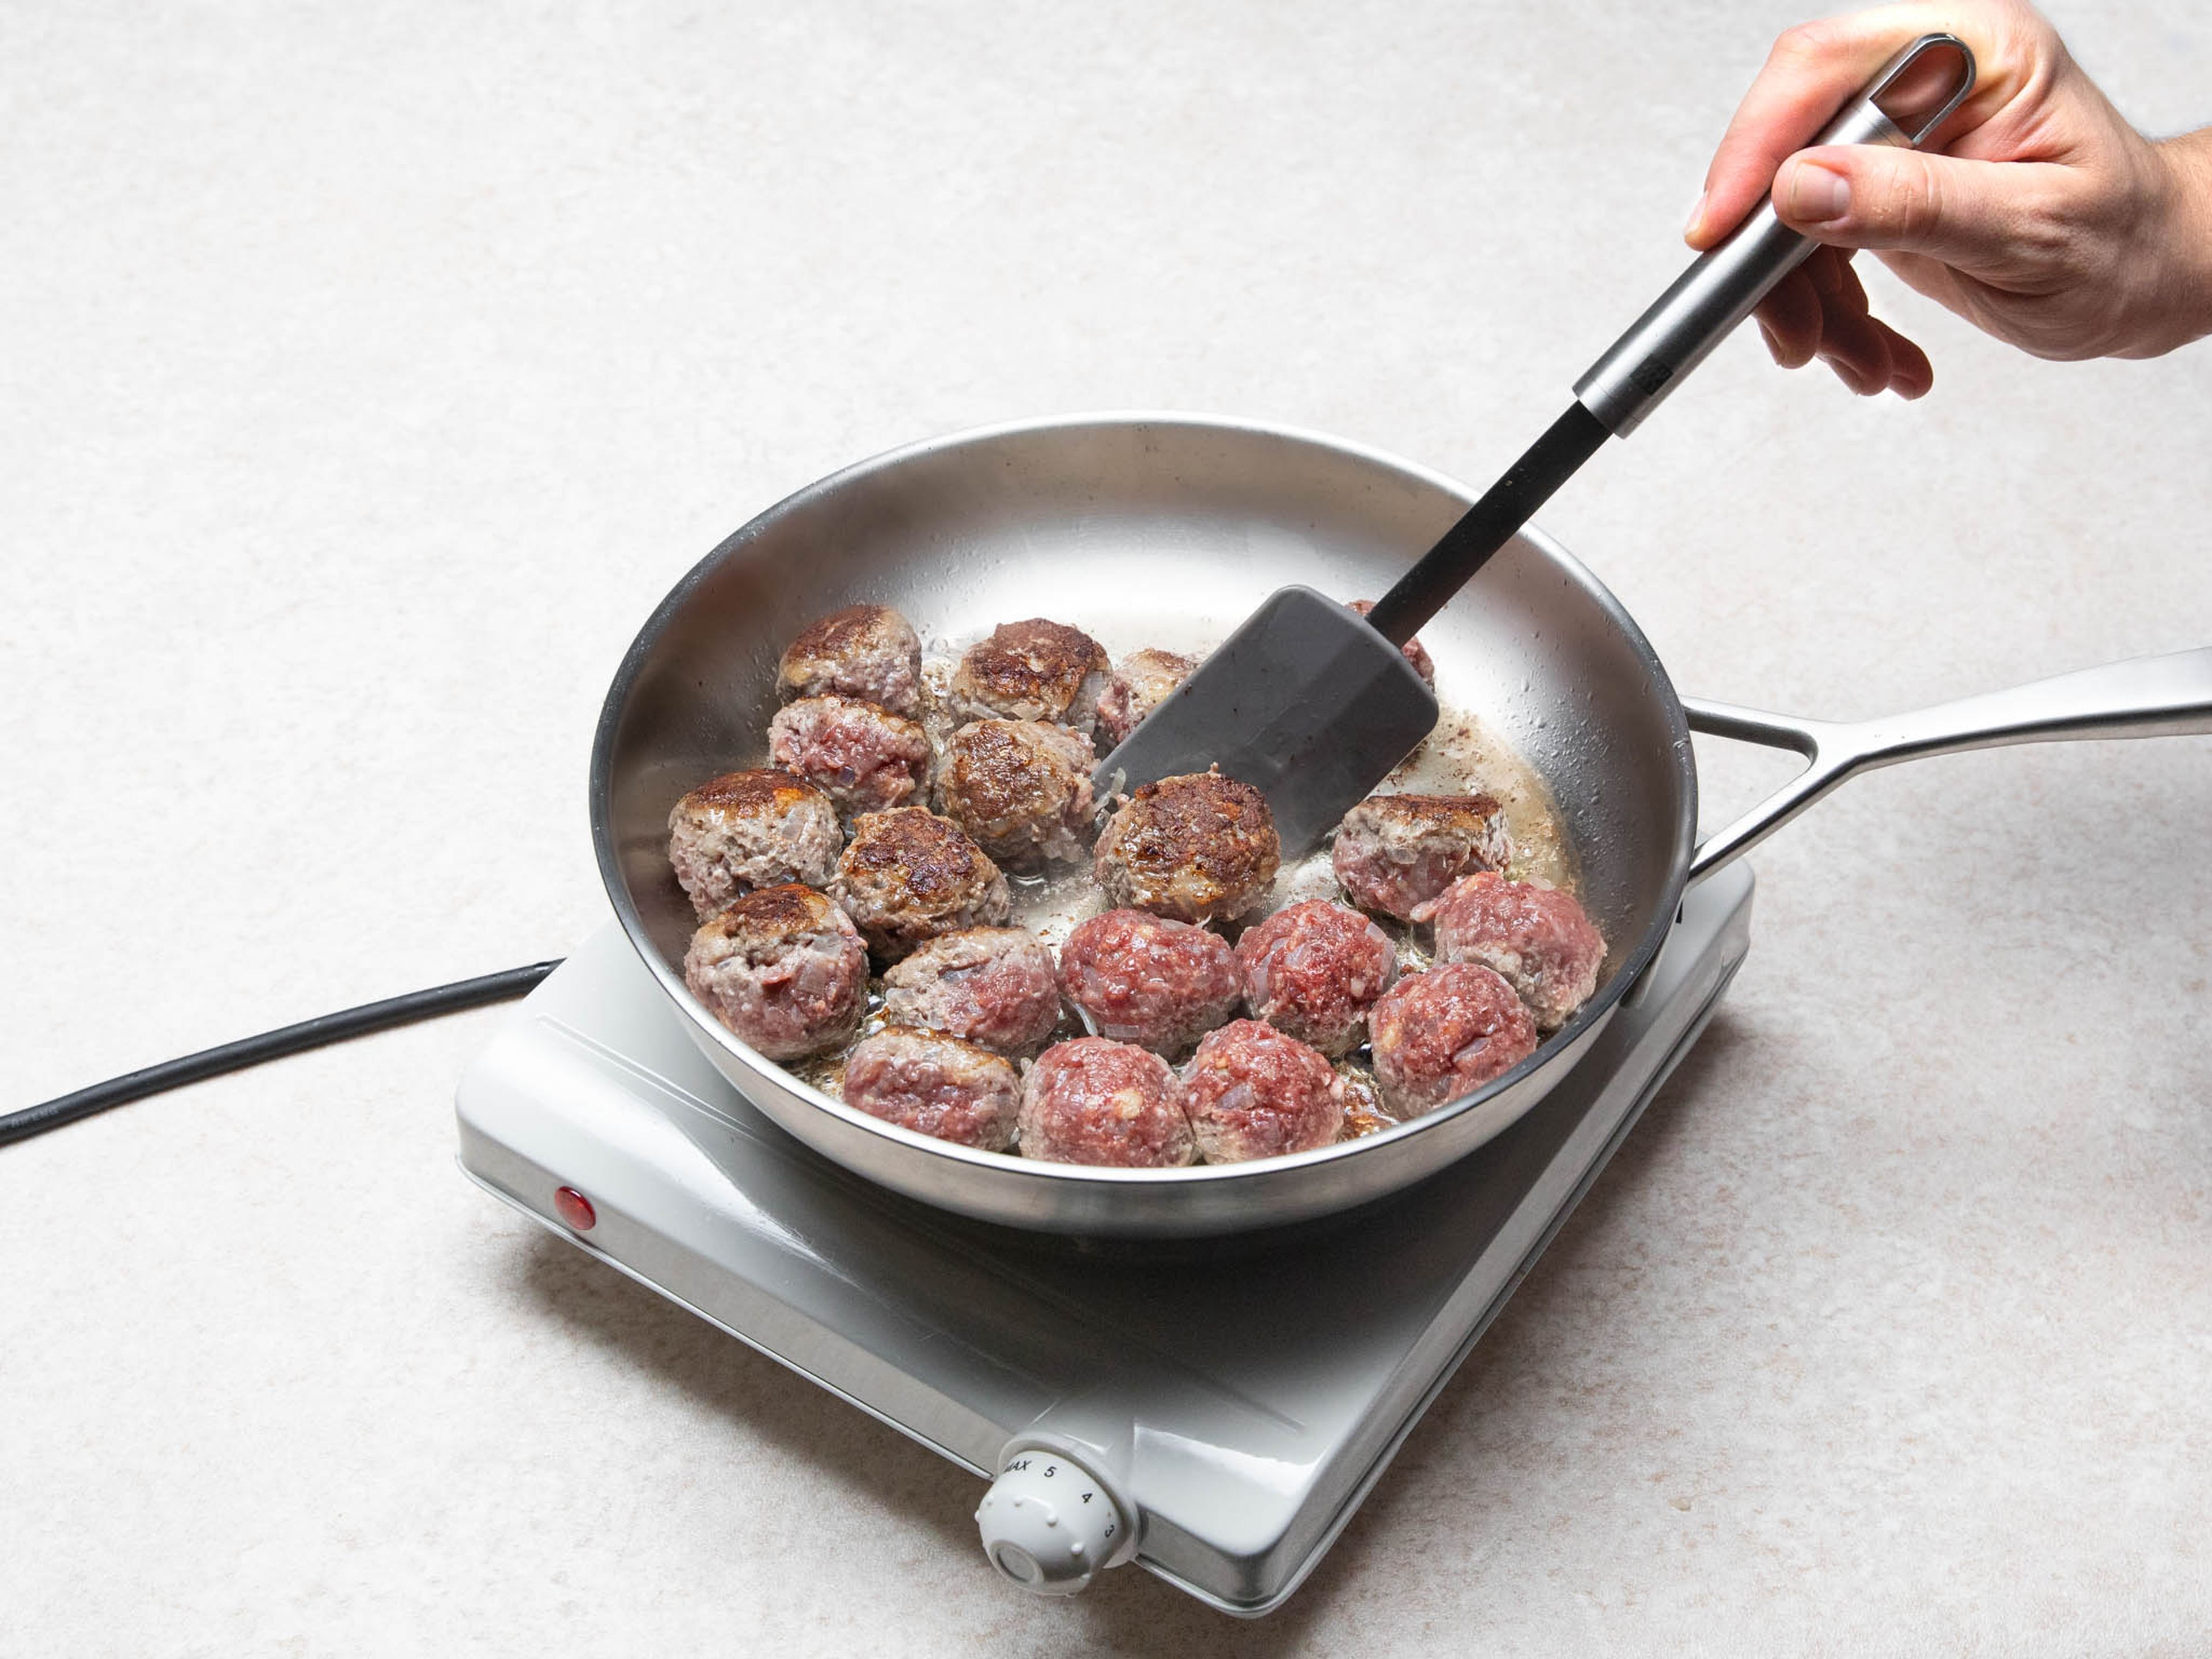 Add some vegetable oil to a large frying pan over medium-high heat. Fry köttbullar until golden brown on all sides, then remove from the pan, and set aside.